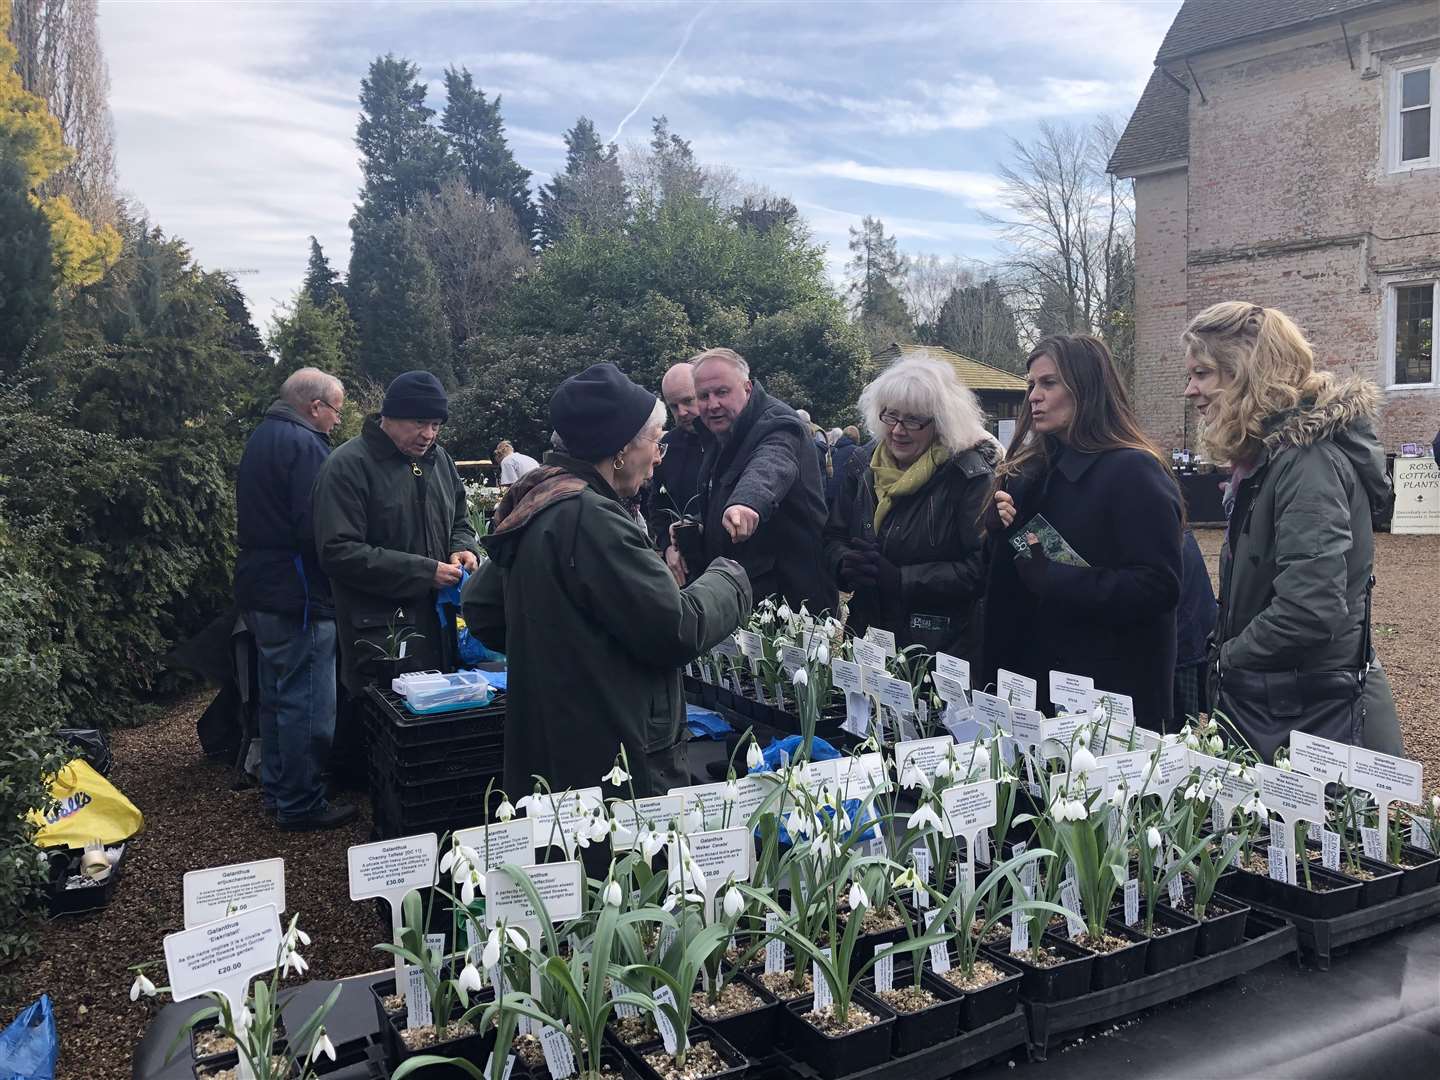 Buyers snapping up the snowdrops